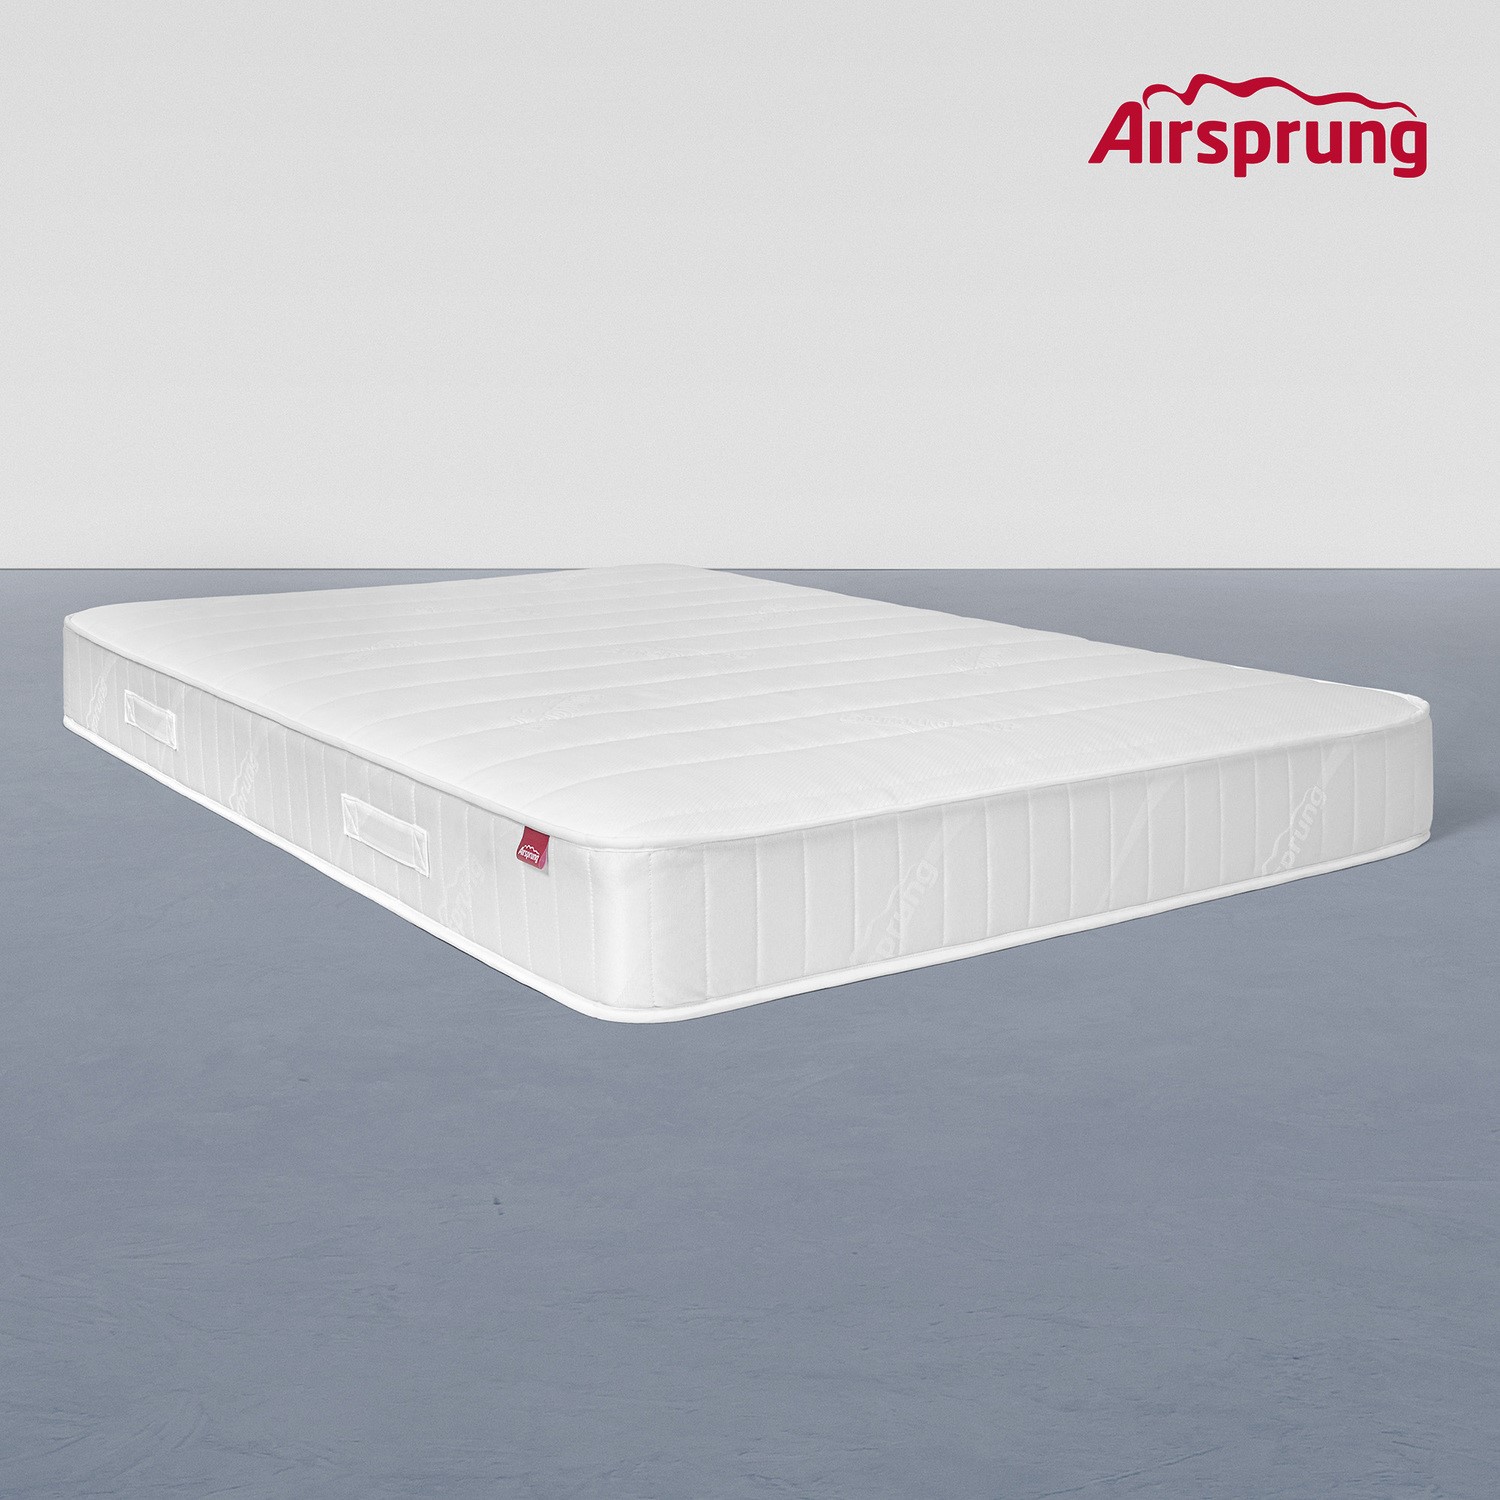 Read more about Small double 1000 pocket sprung rolled recycled fibre mattress airsprung